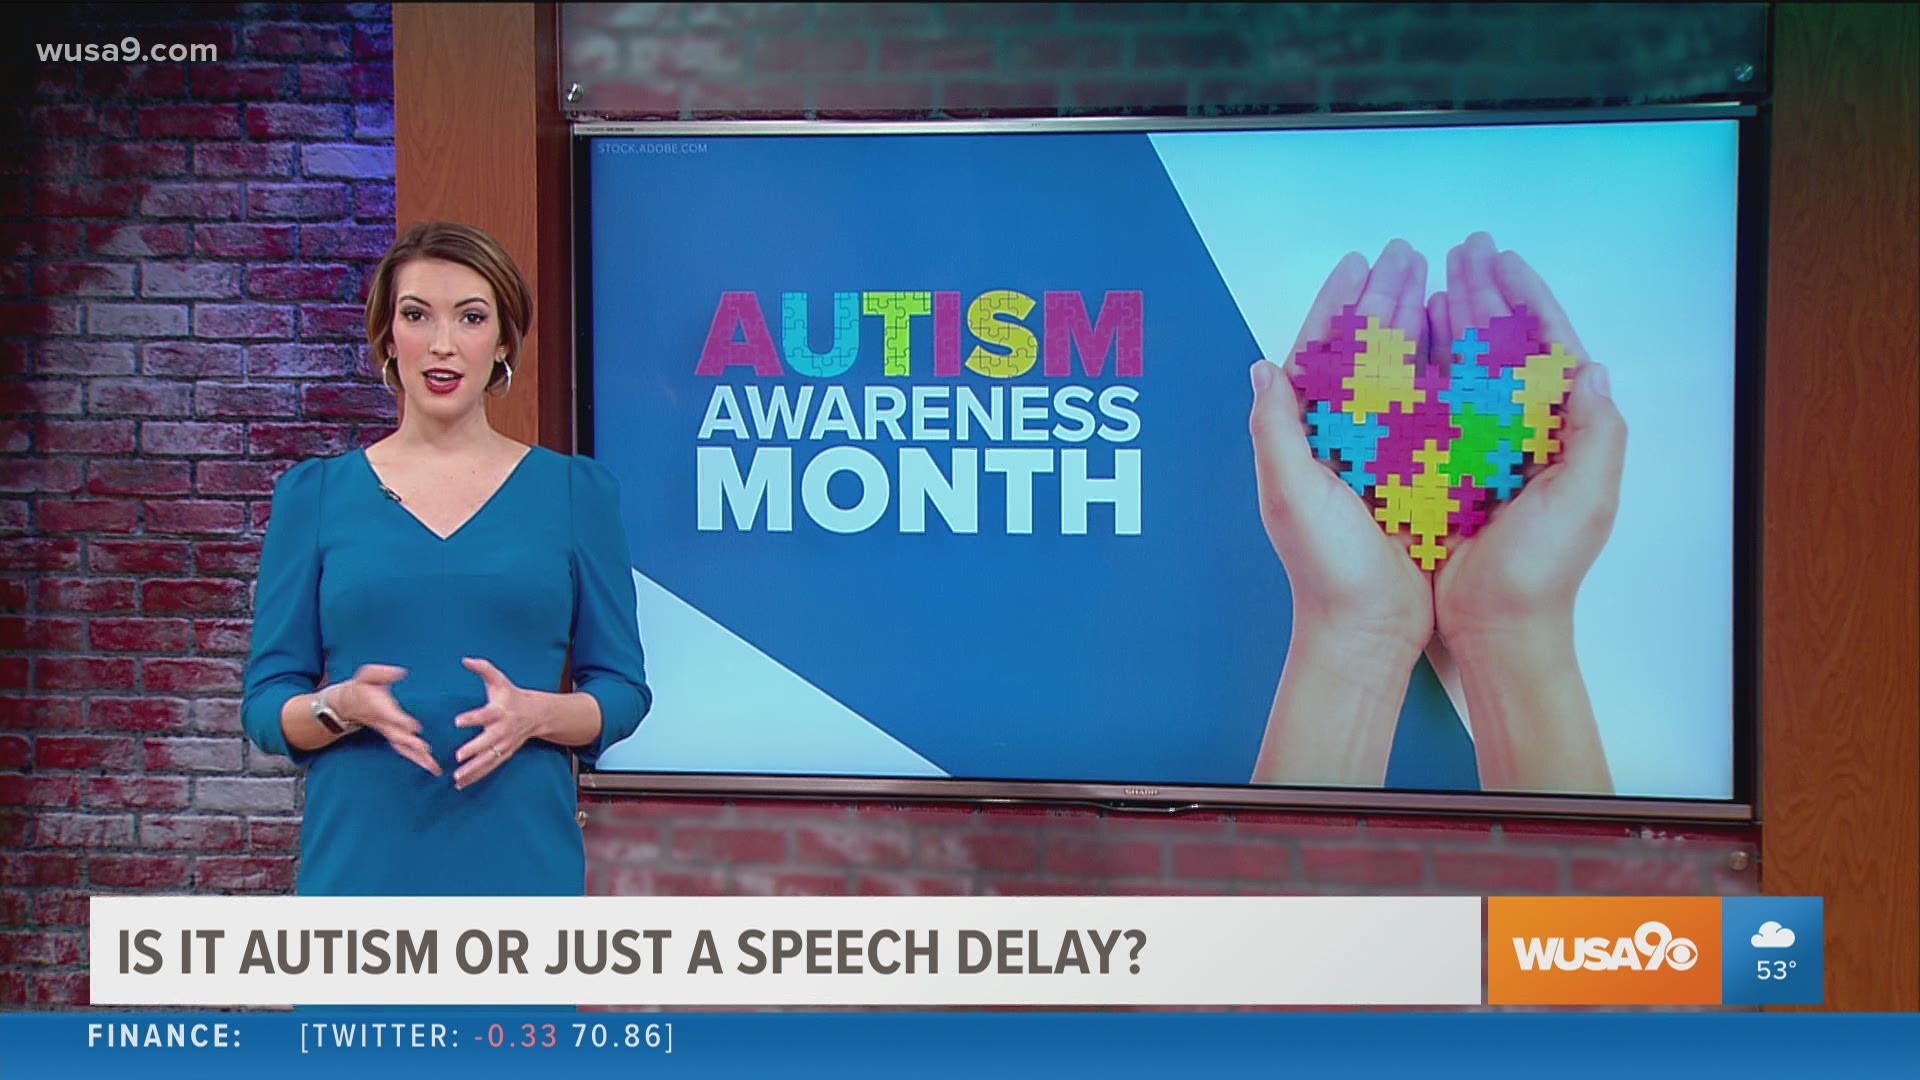 Dr. Mary Lynch Barbera, author of "Turn Autism Around" shares tips on how to identify delayed development and autism indicators.